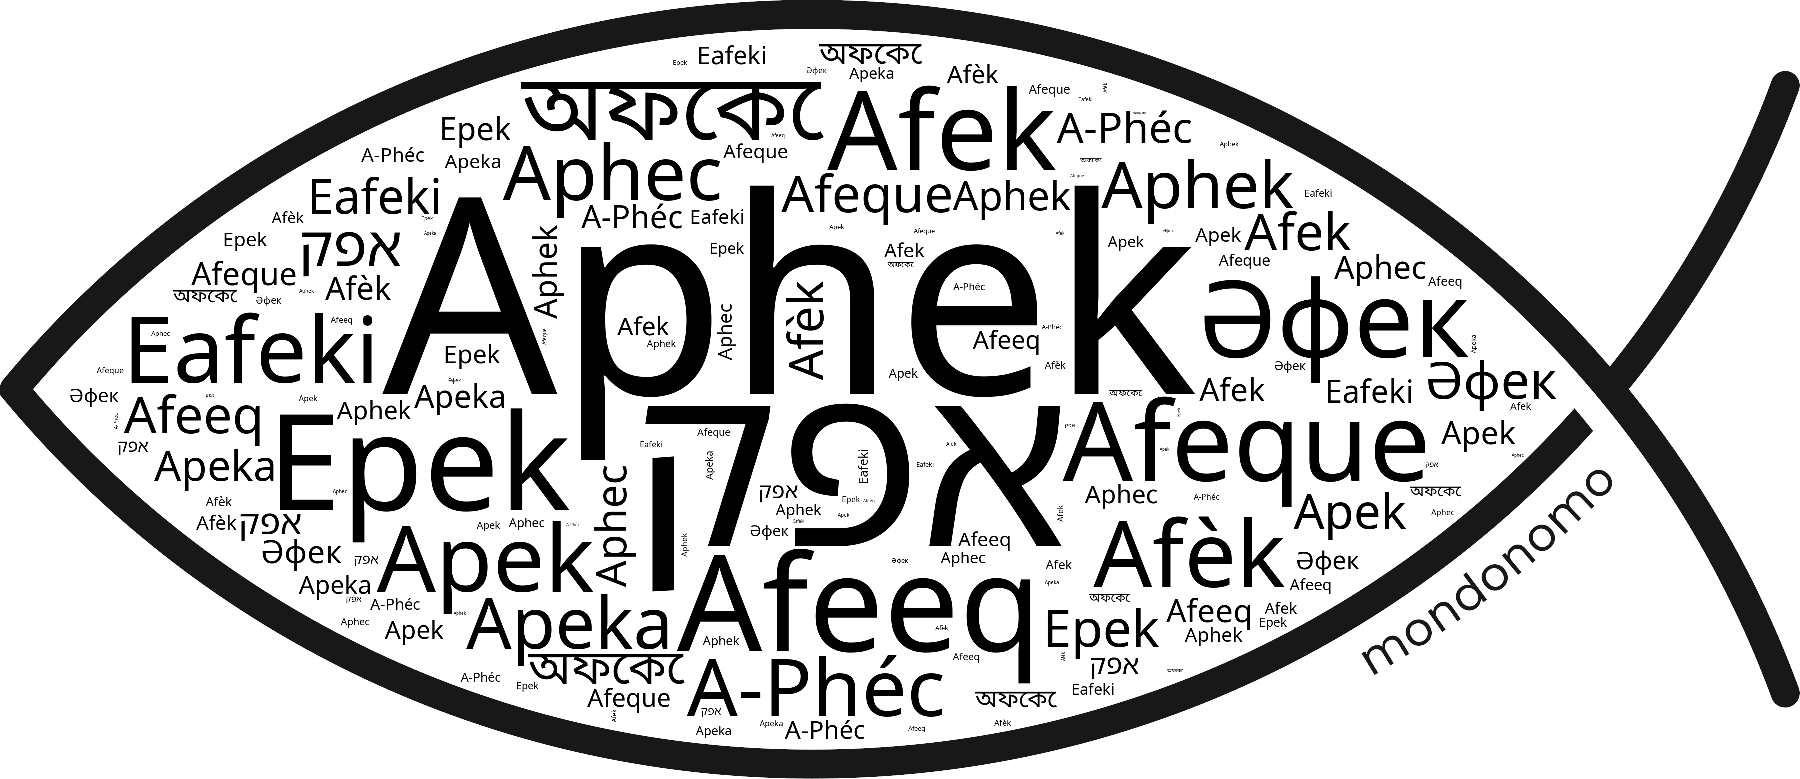 Name Aphek in the world's Bibles